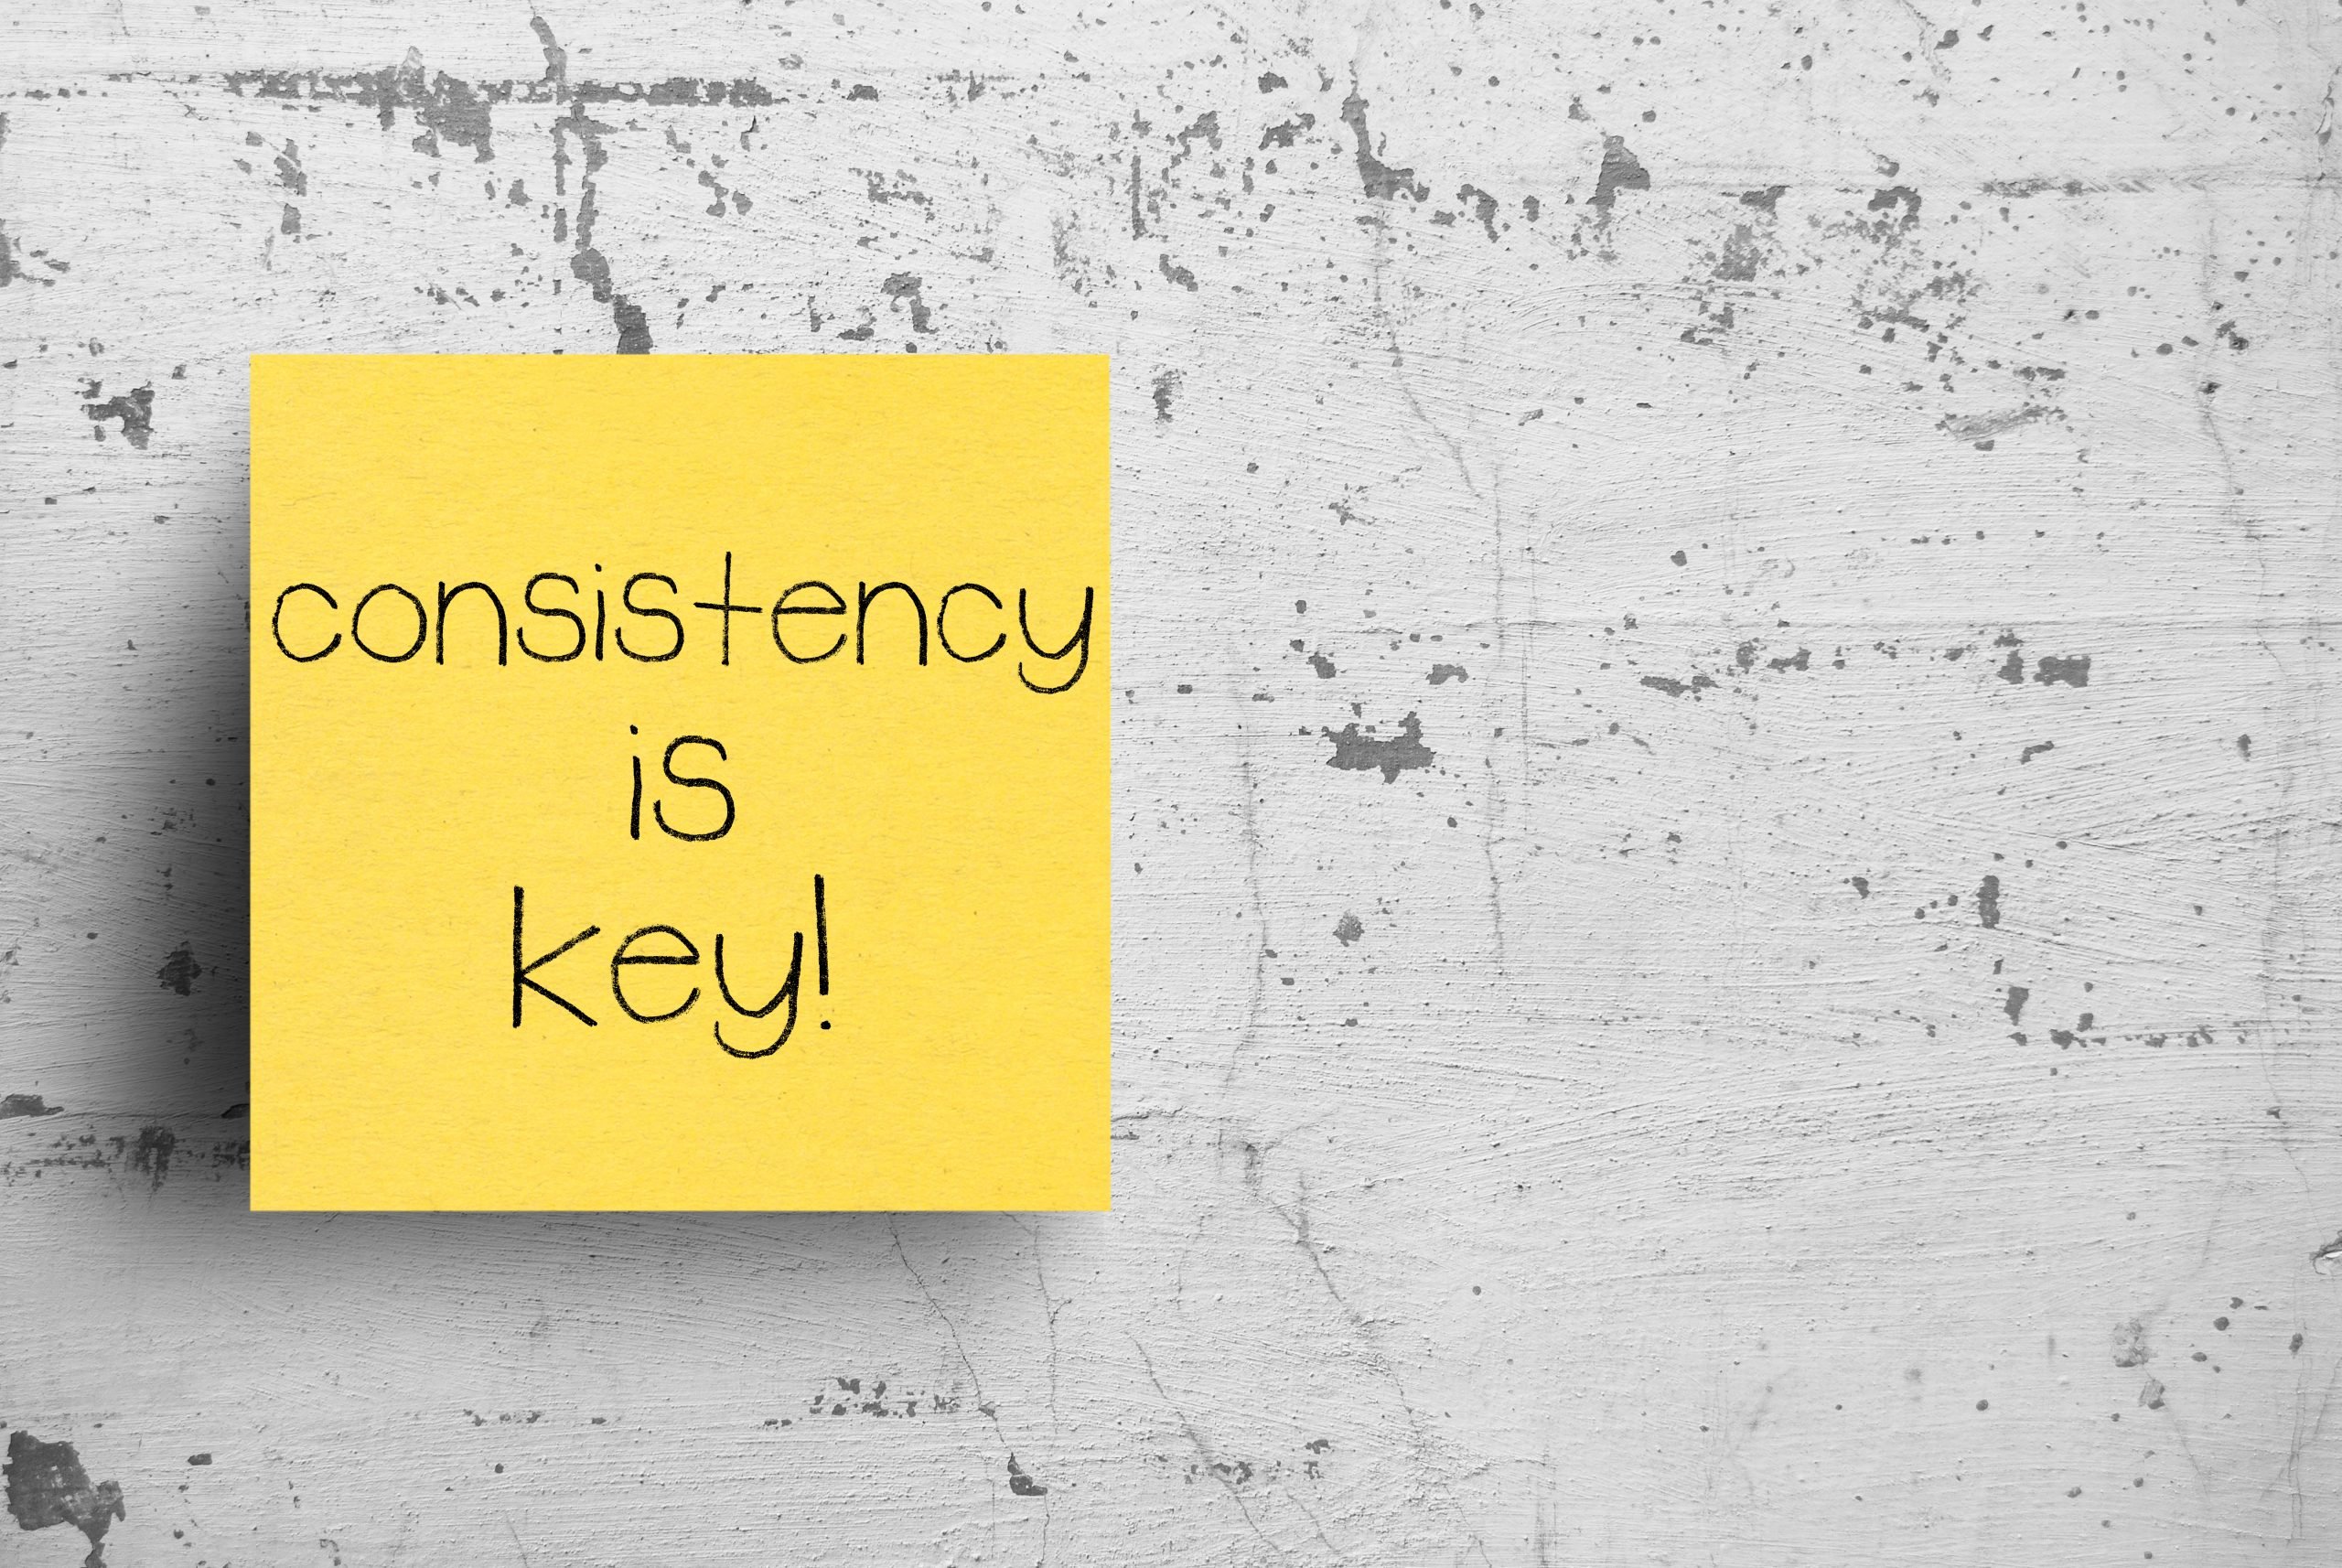 Golden Rules of UI Design - Prioritize consistency and usability